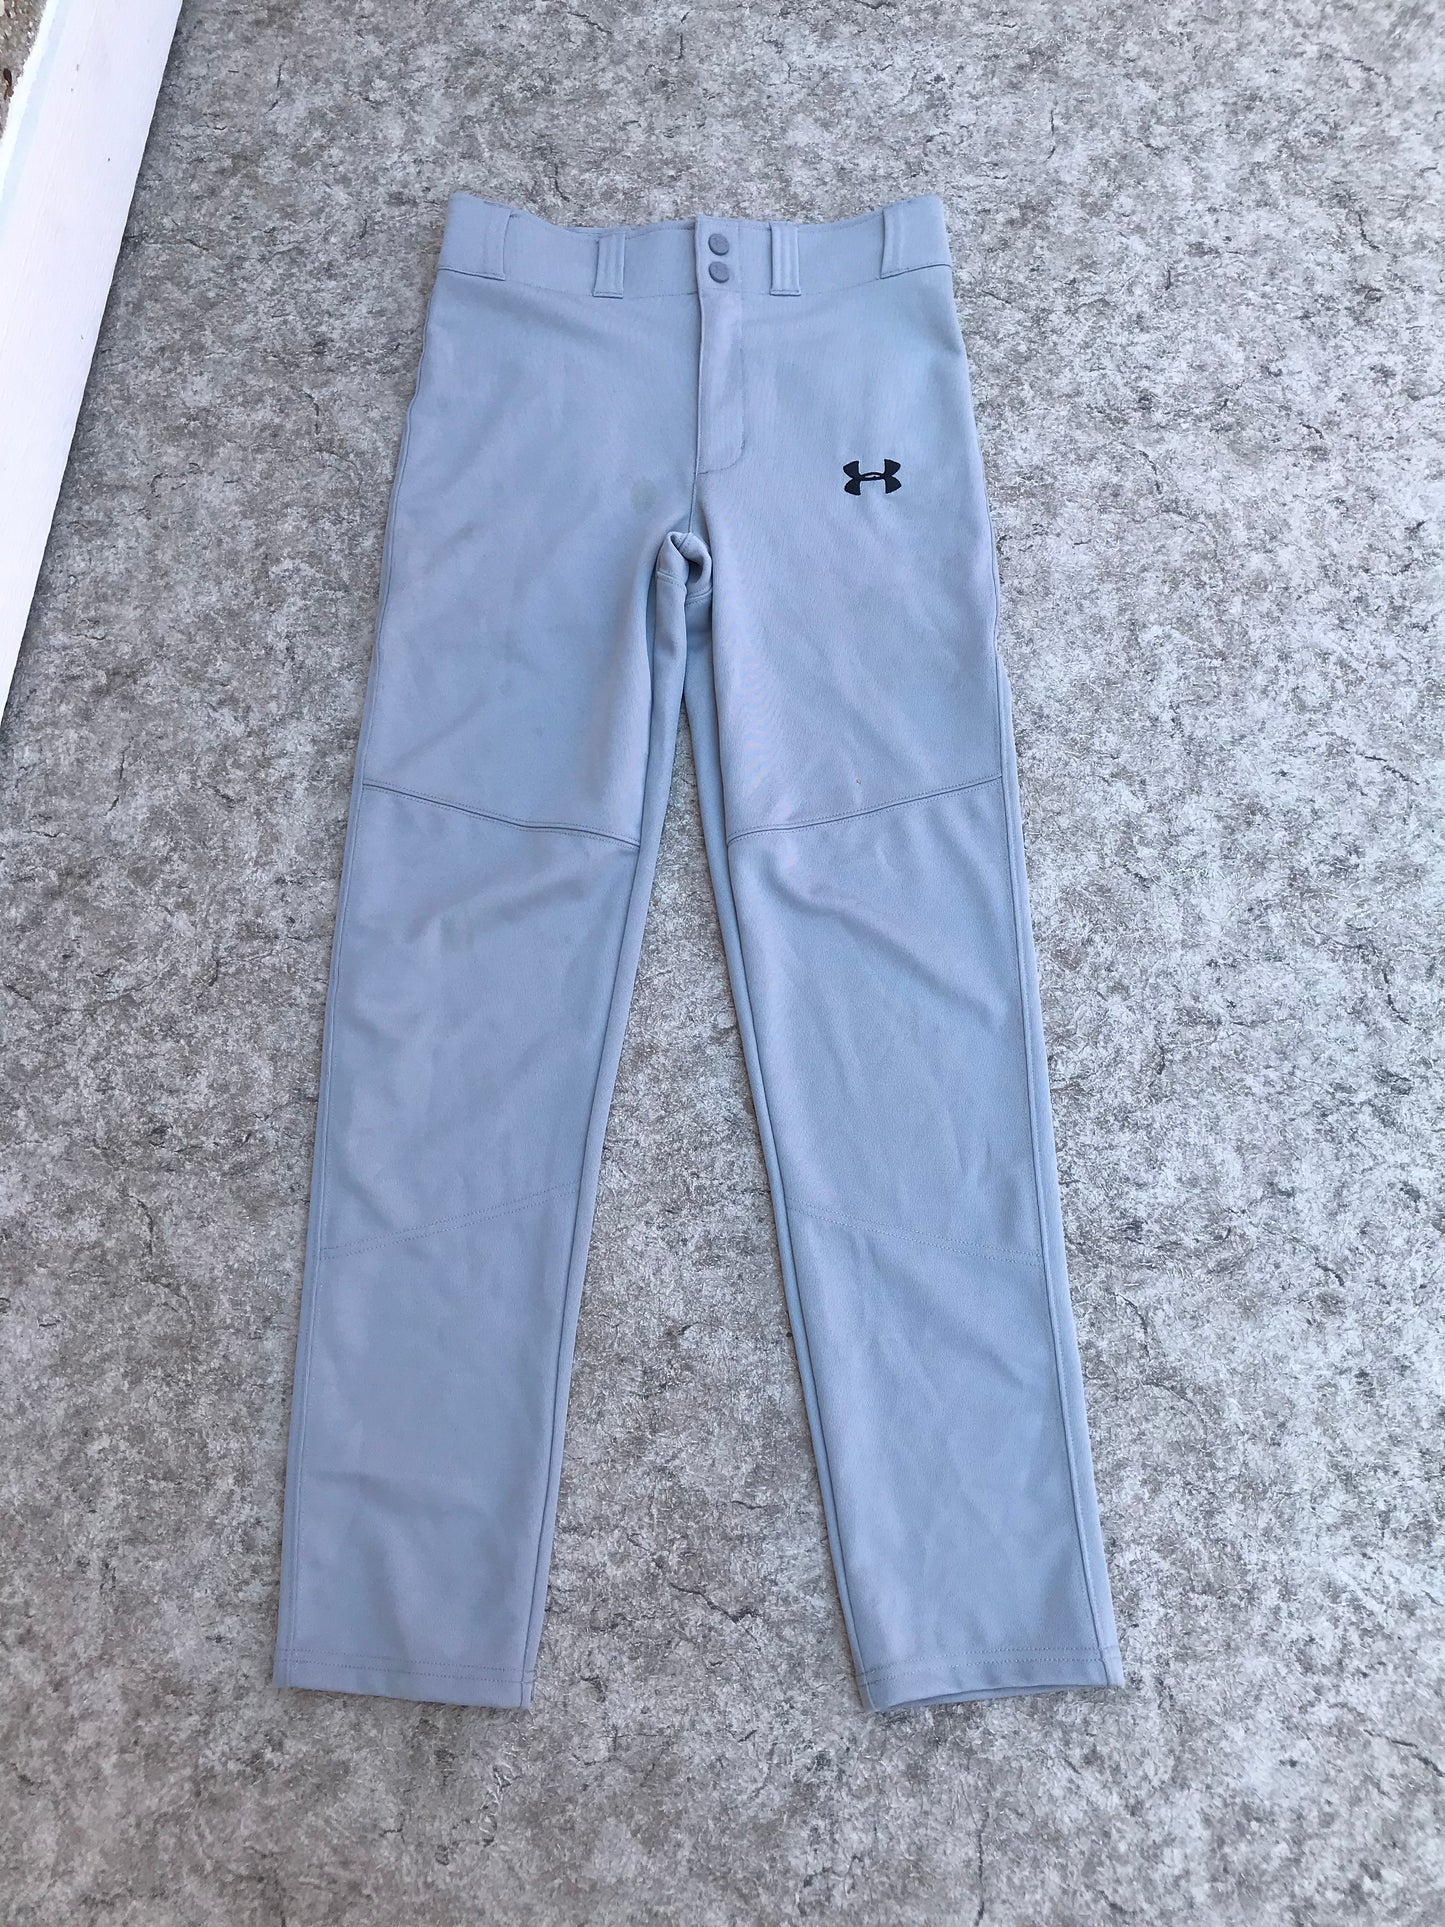 Baseball Pants Child Size Large Under Armour Grey Excellent